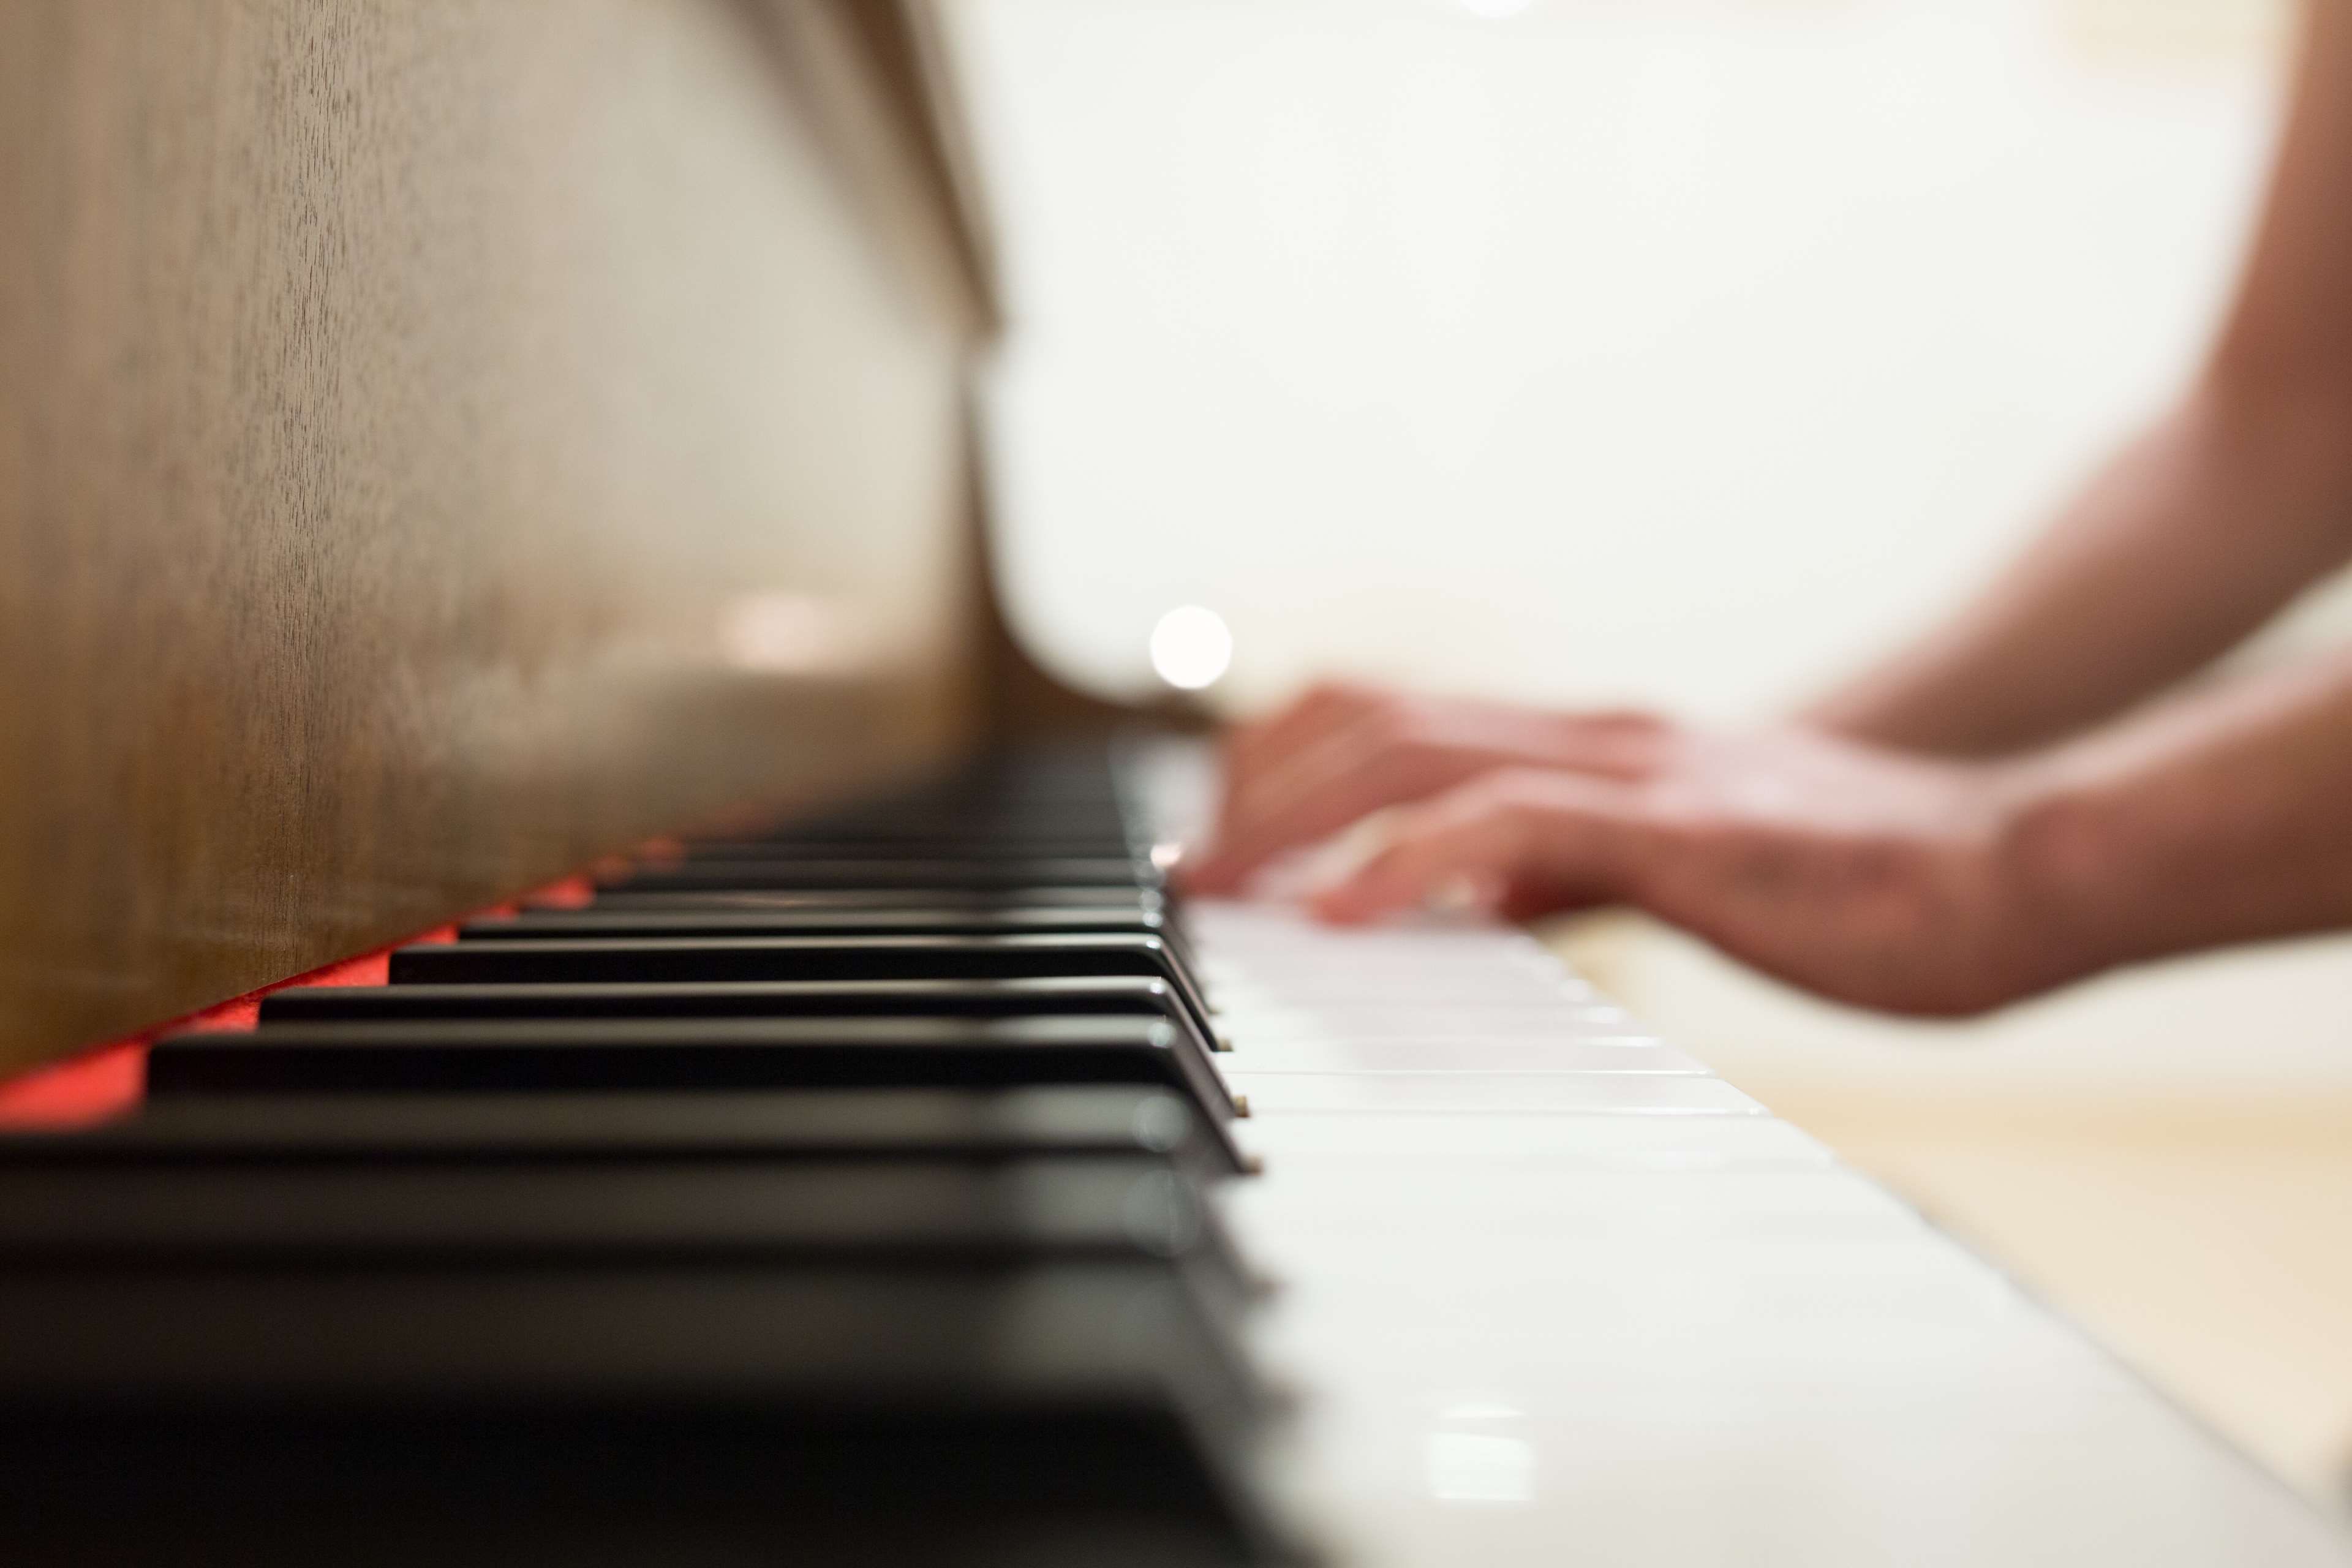 hands, keyboard, music, notes, pianist, piano, royalty free image 4k wallpaper